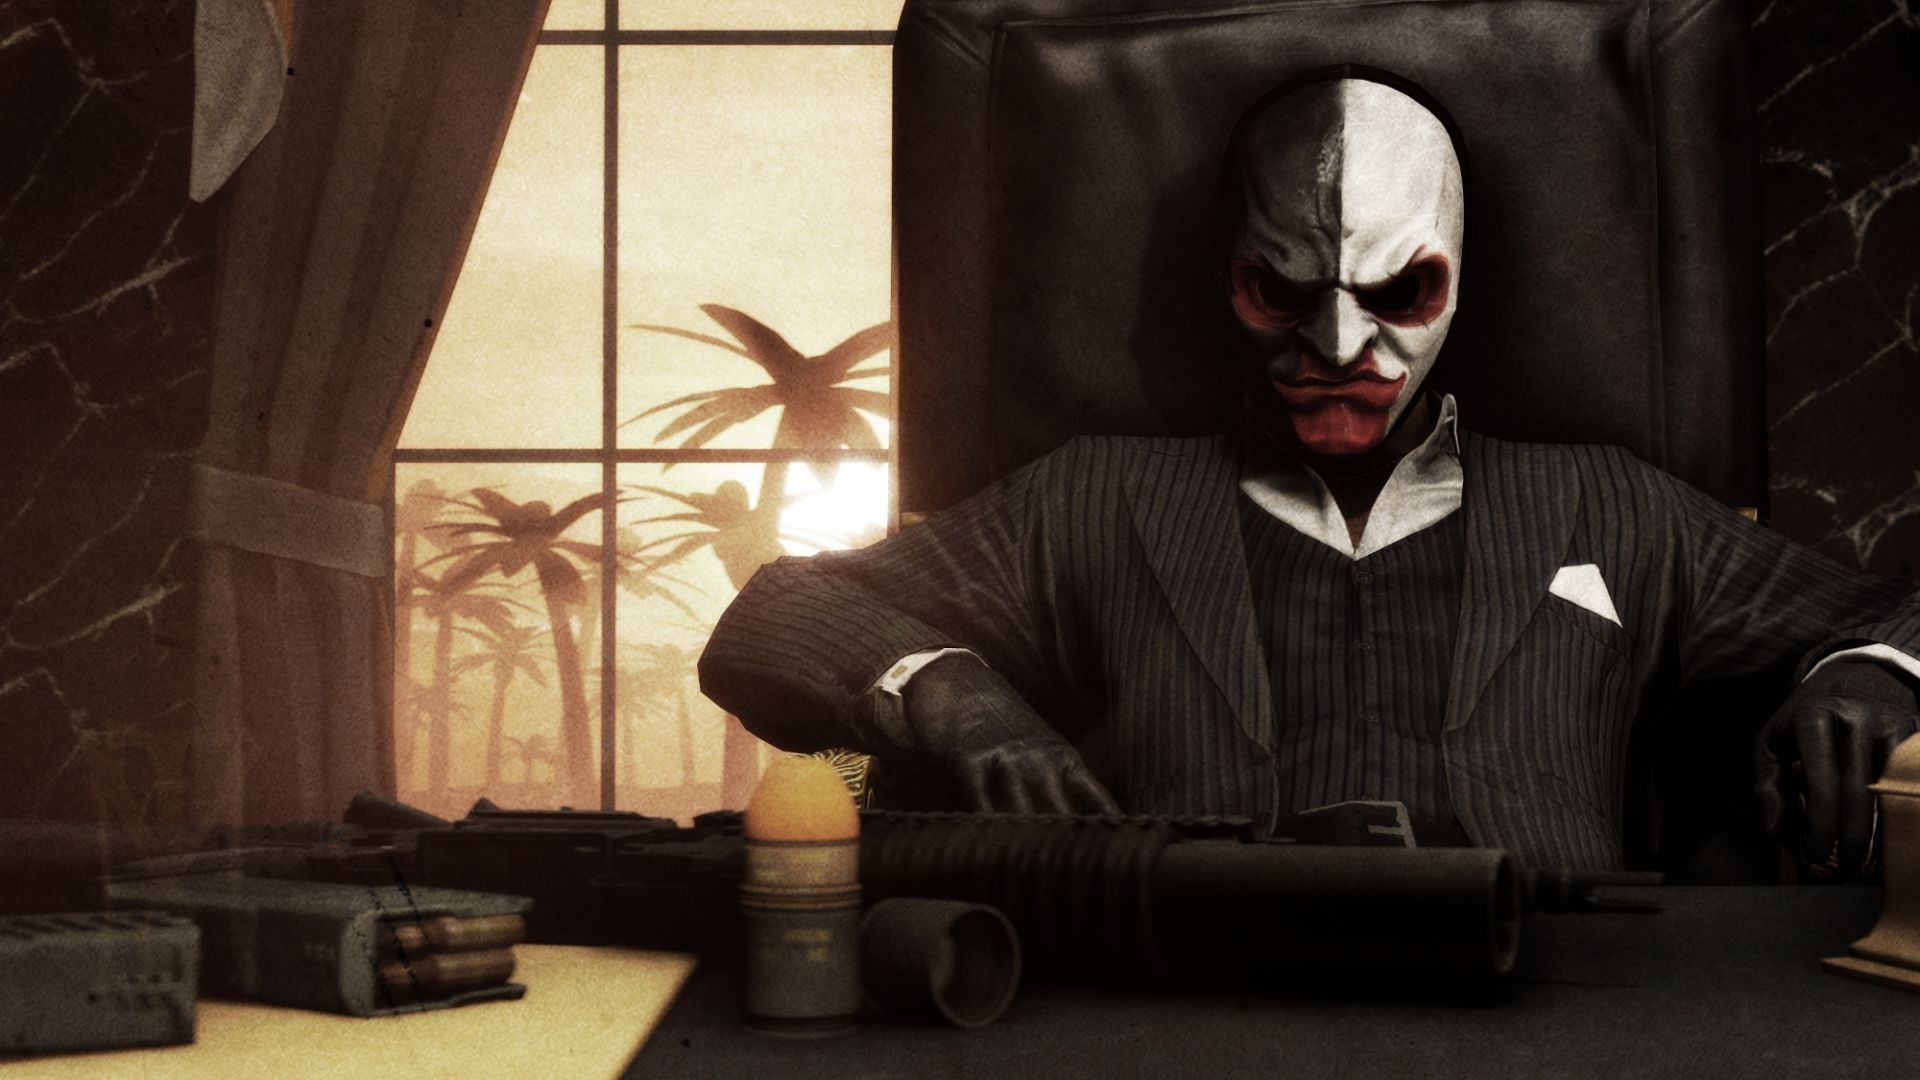 free payday 2 download for pc